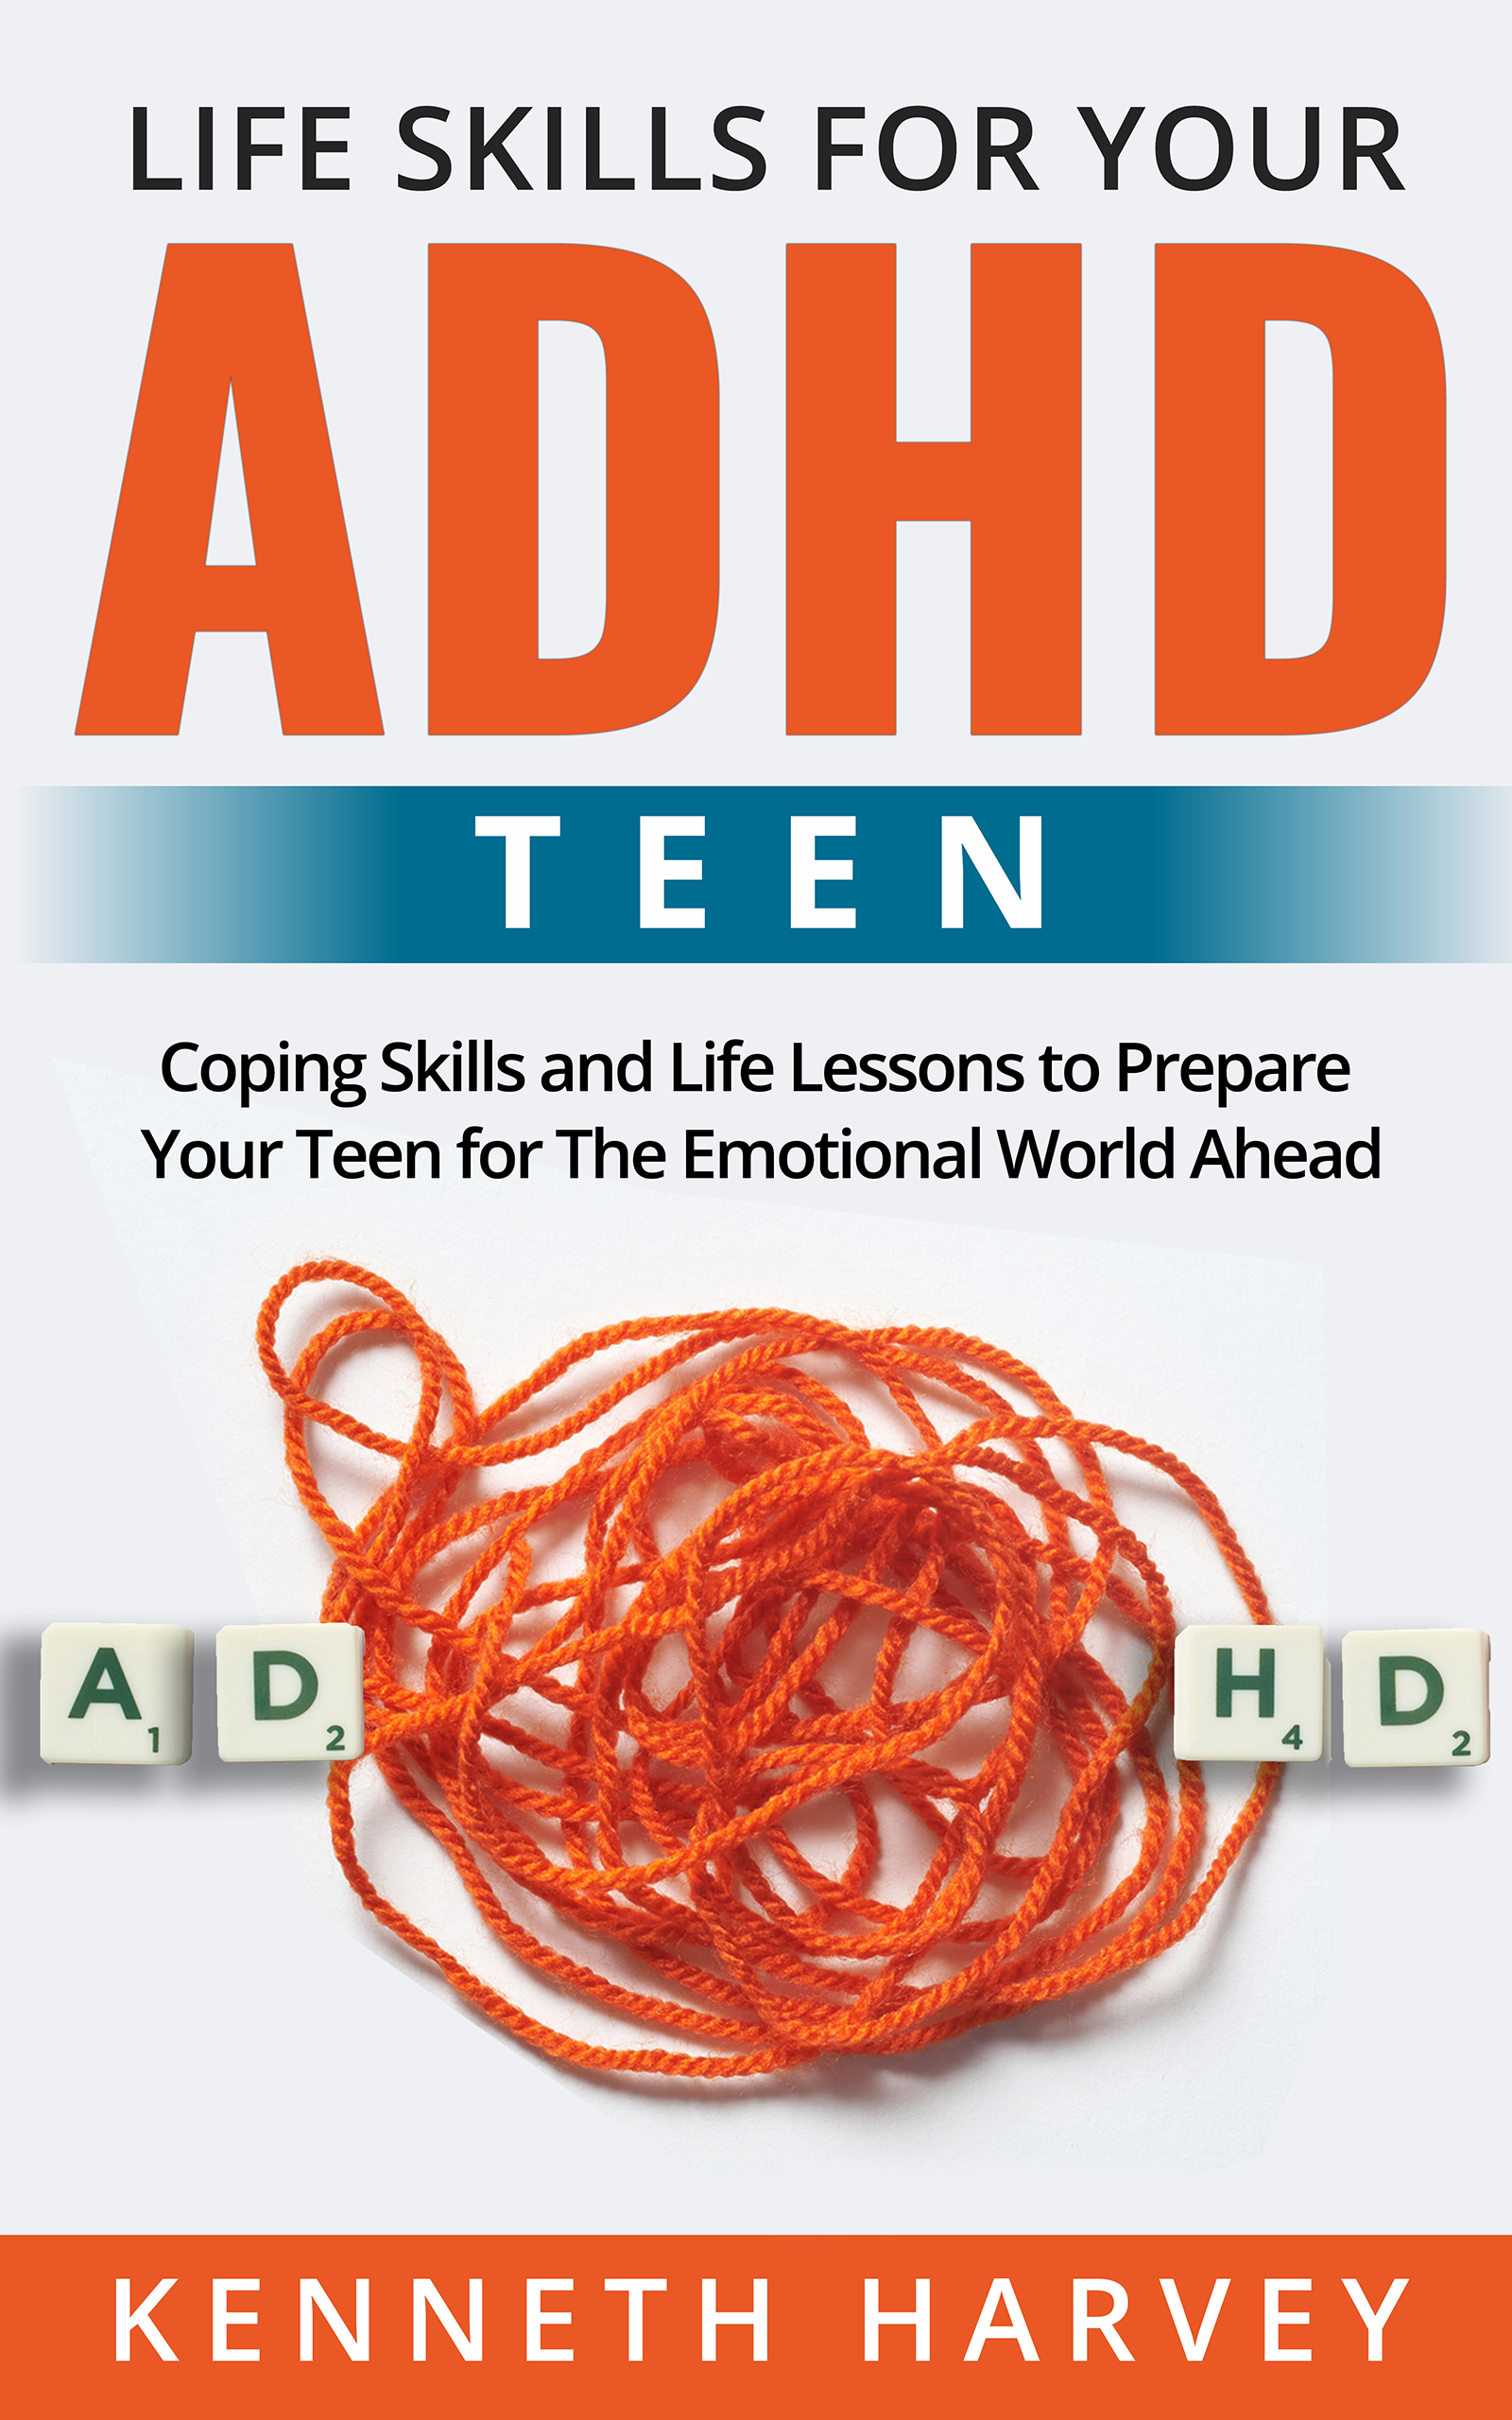 FREE: Life skills for your ADHD teen by kenneth harvey